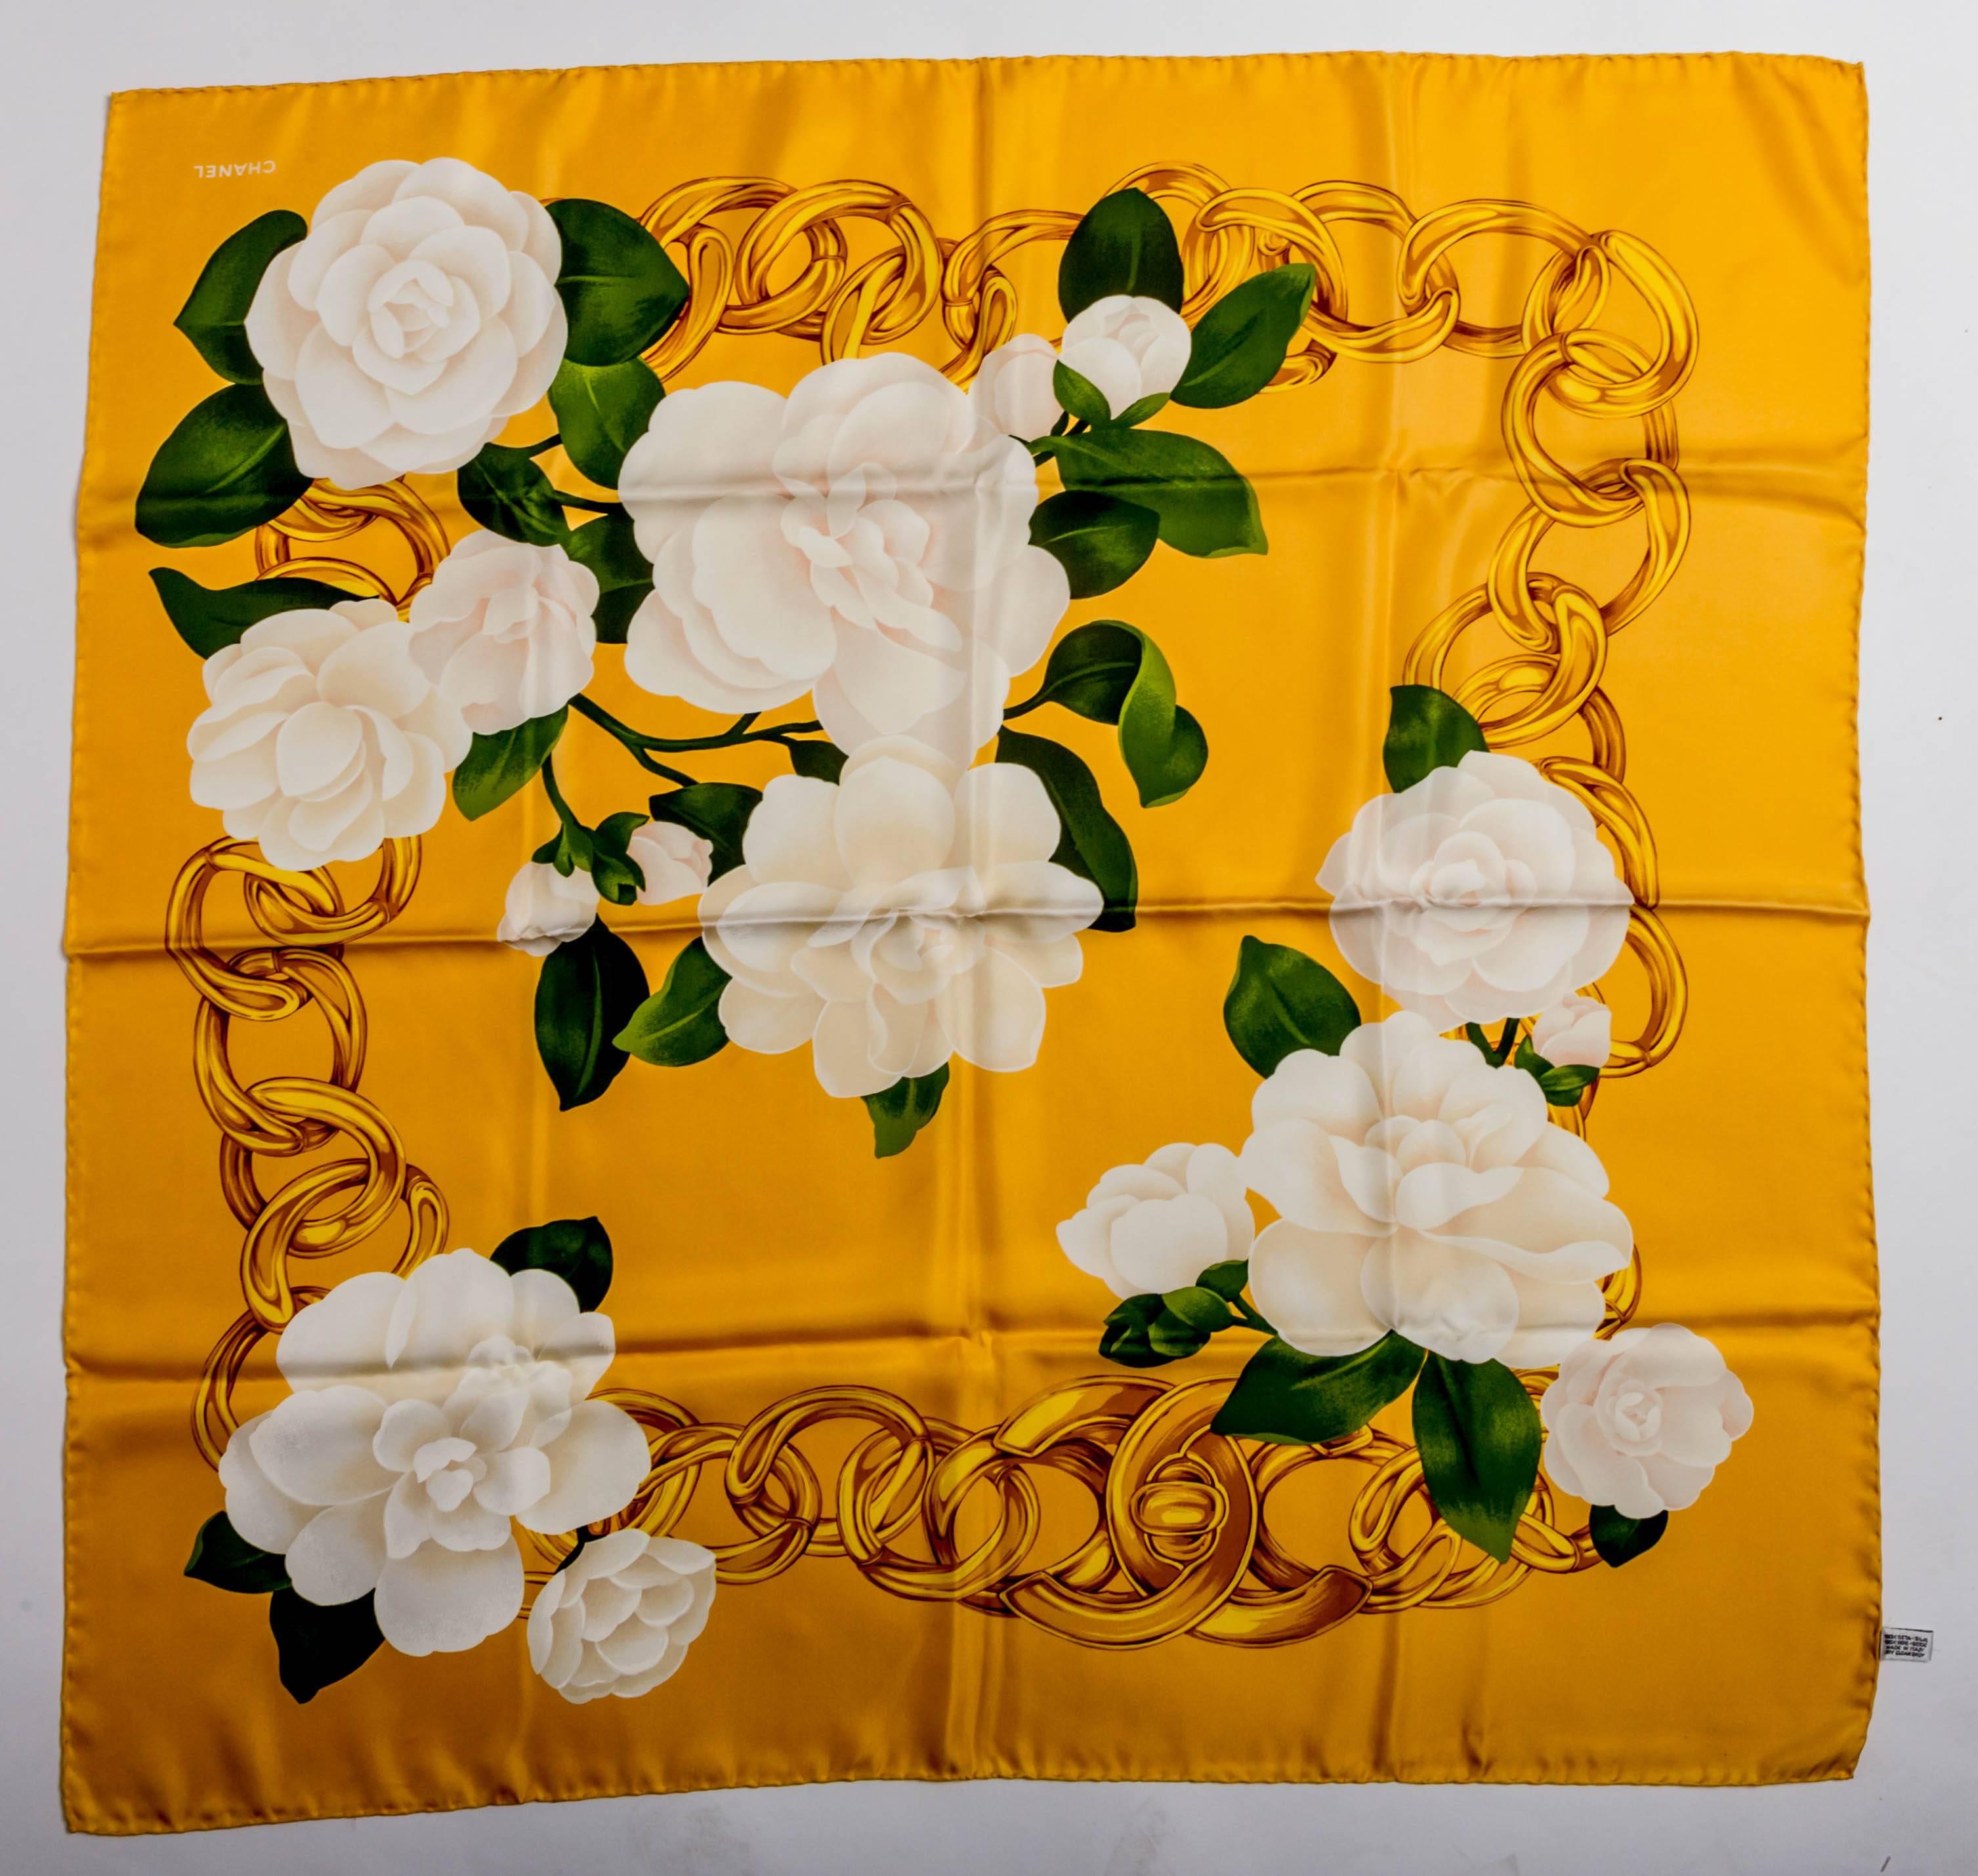 Gorgeous Gold and White Chanel Camellia Silk Scarf.
With hand rolled edges, this scarf is a true work of art.
Green leaves and a gold Chanel chain are intertwined throughout this beautiful piece.
There are a few tiny spots ... too small to